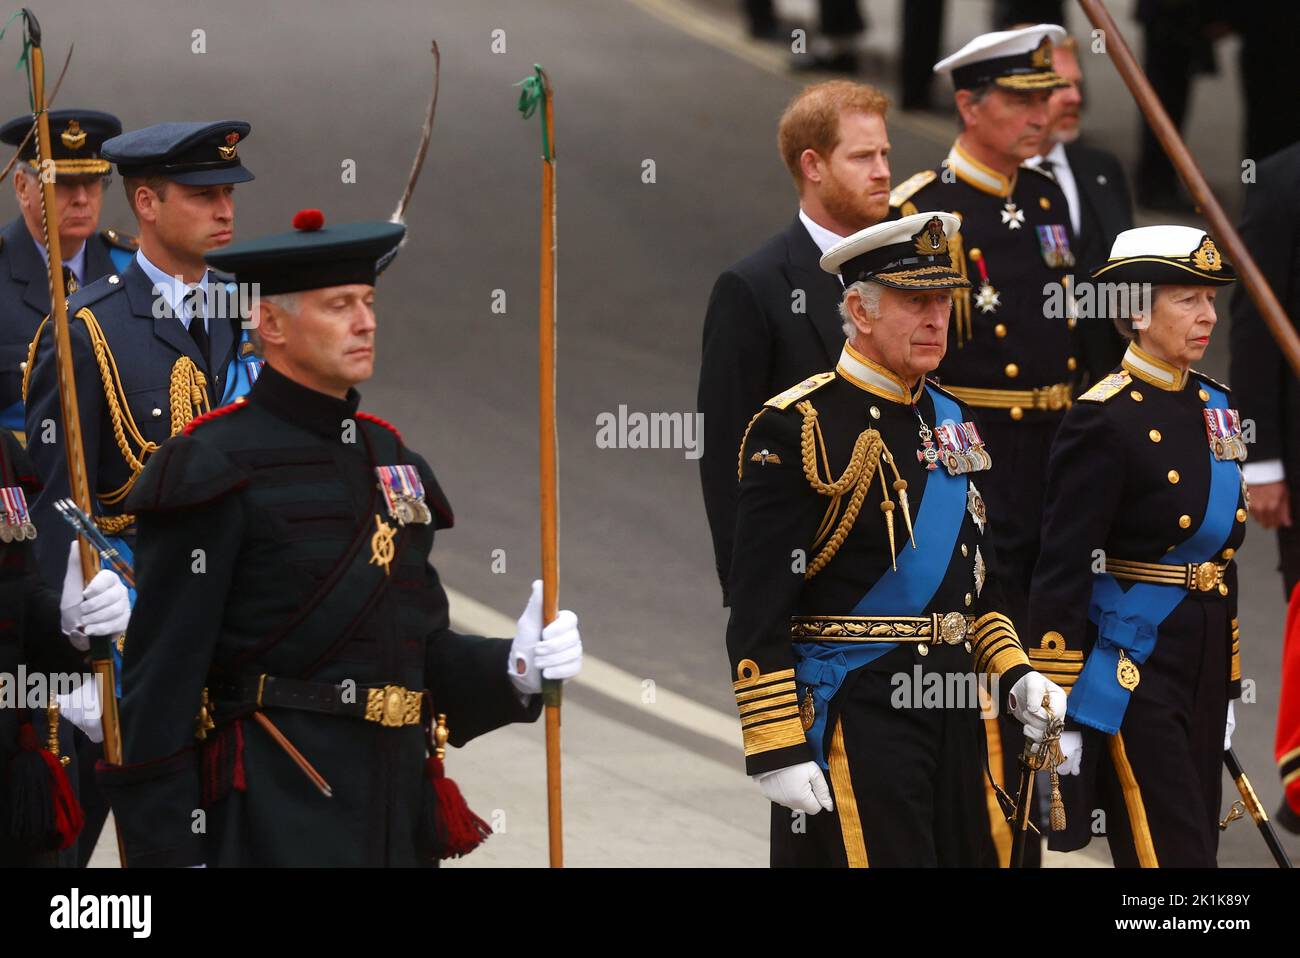 Britain's King Charles, Britain's Anne, Princess Royal, Britain's William, Prince of Wales and Britain's Prince Harry, Duke of Sussex attend the state funeral and burial of Britain's Queen Elizabeth at Westminster Abbey, in London, Britain, September 19, 2022.  REUTERS/Kai Pfaffenbach Stock Photo